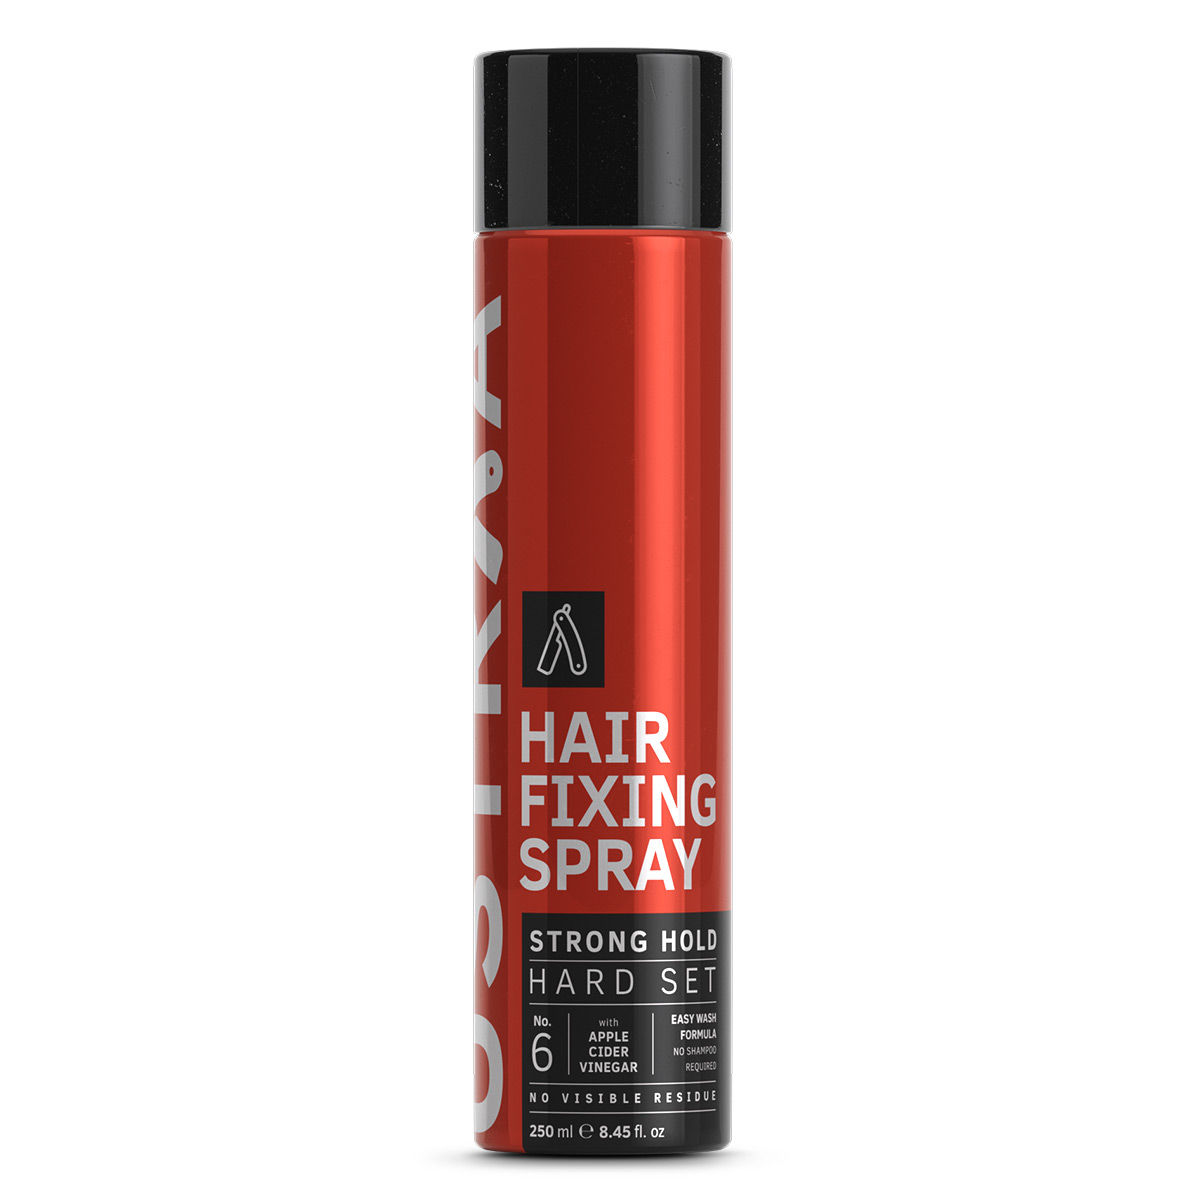 Aggregate 150+ best hair fixing in india